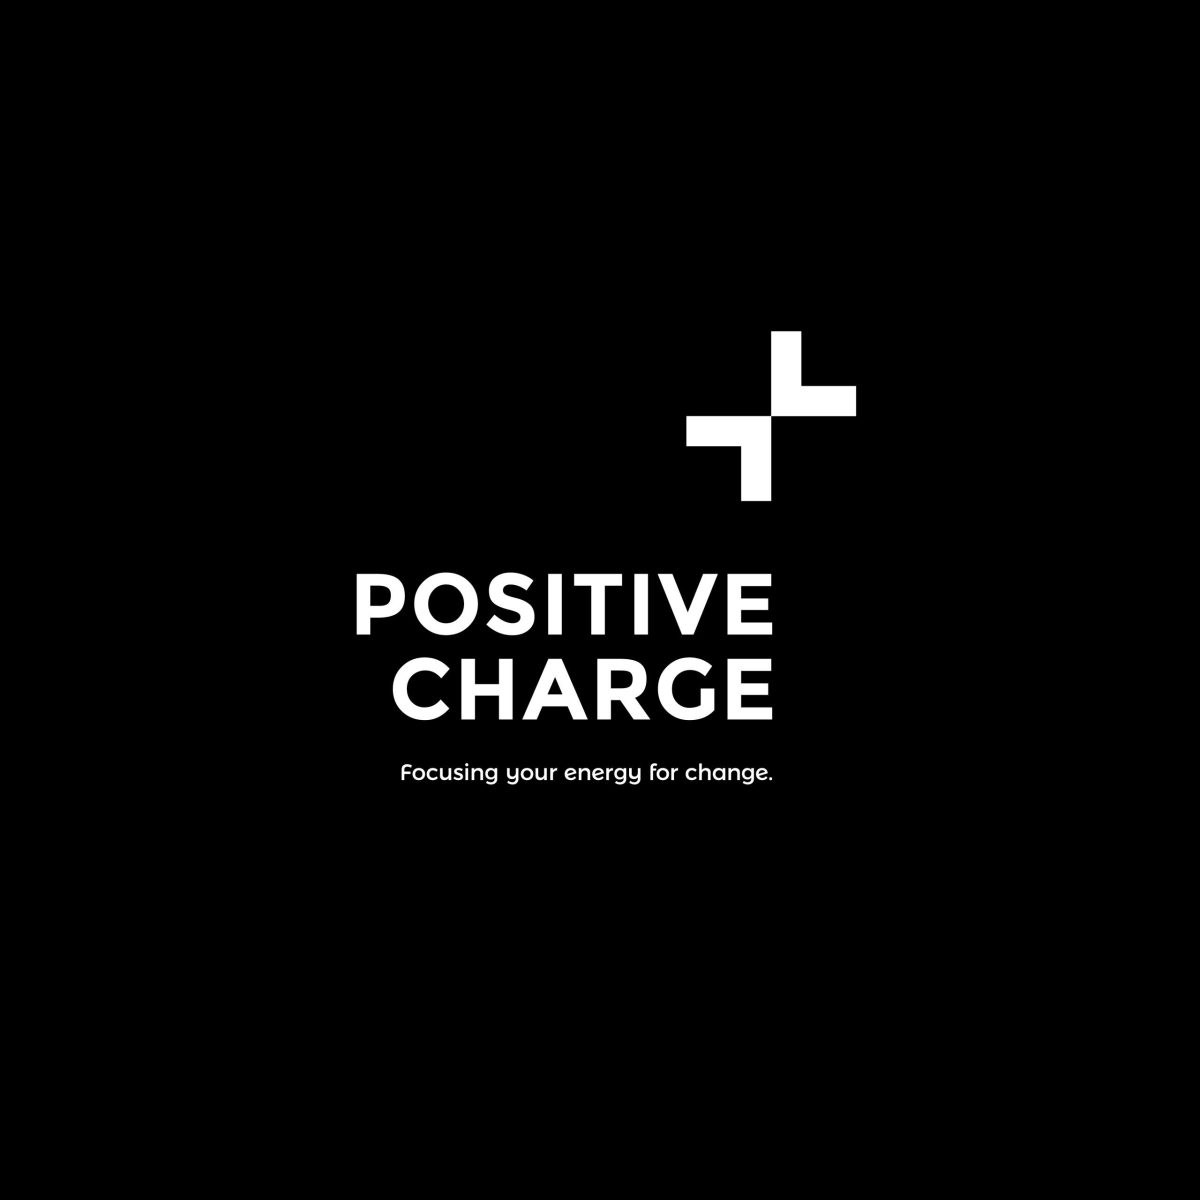 Logo__PositiveCharge__white